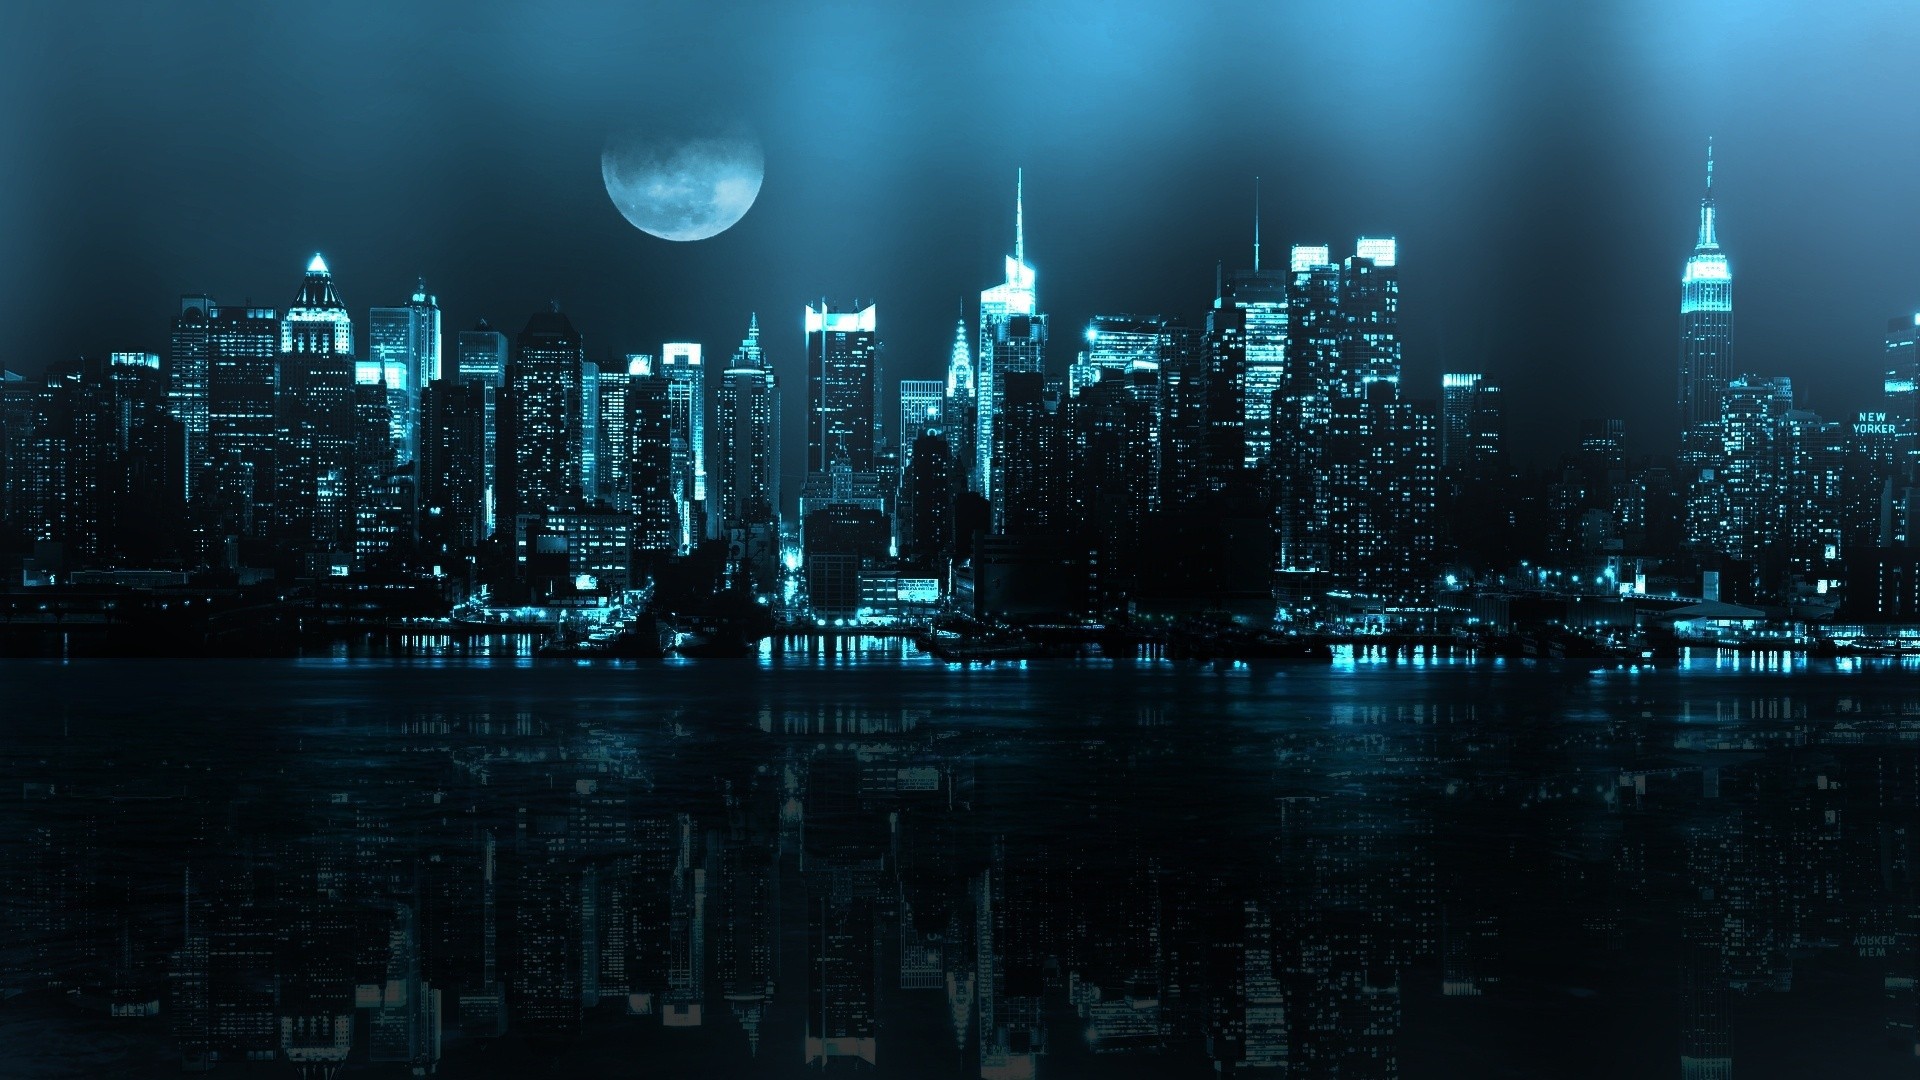 Moon over night city wallpapers and images   wallpapers pictures